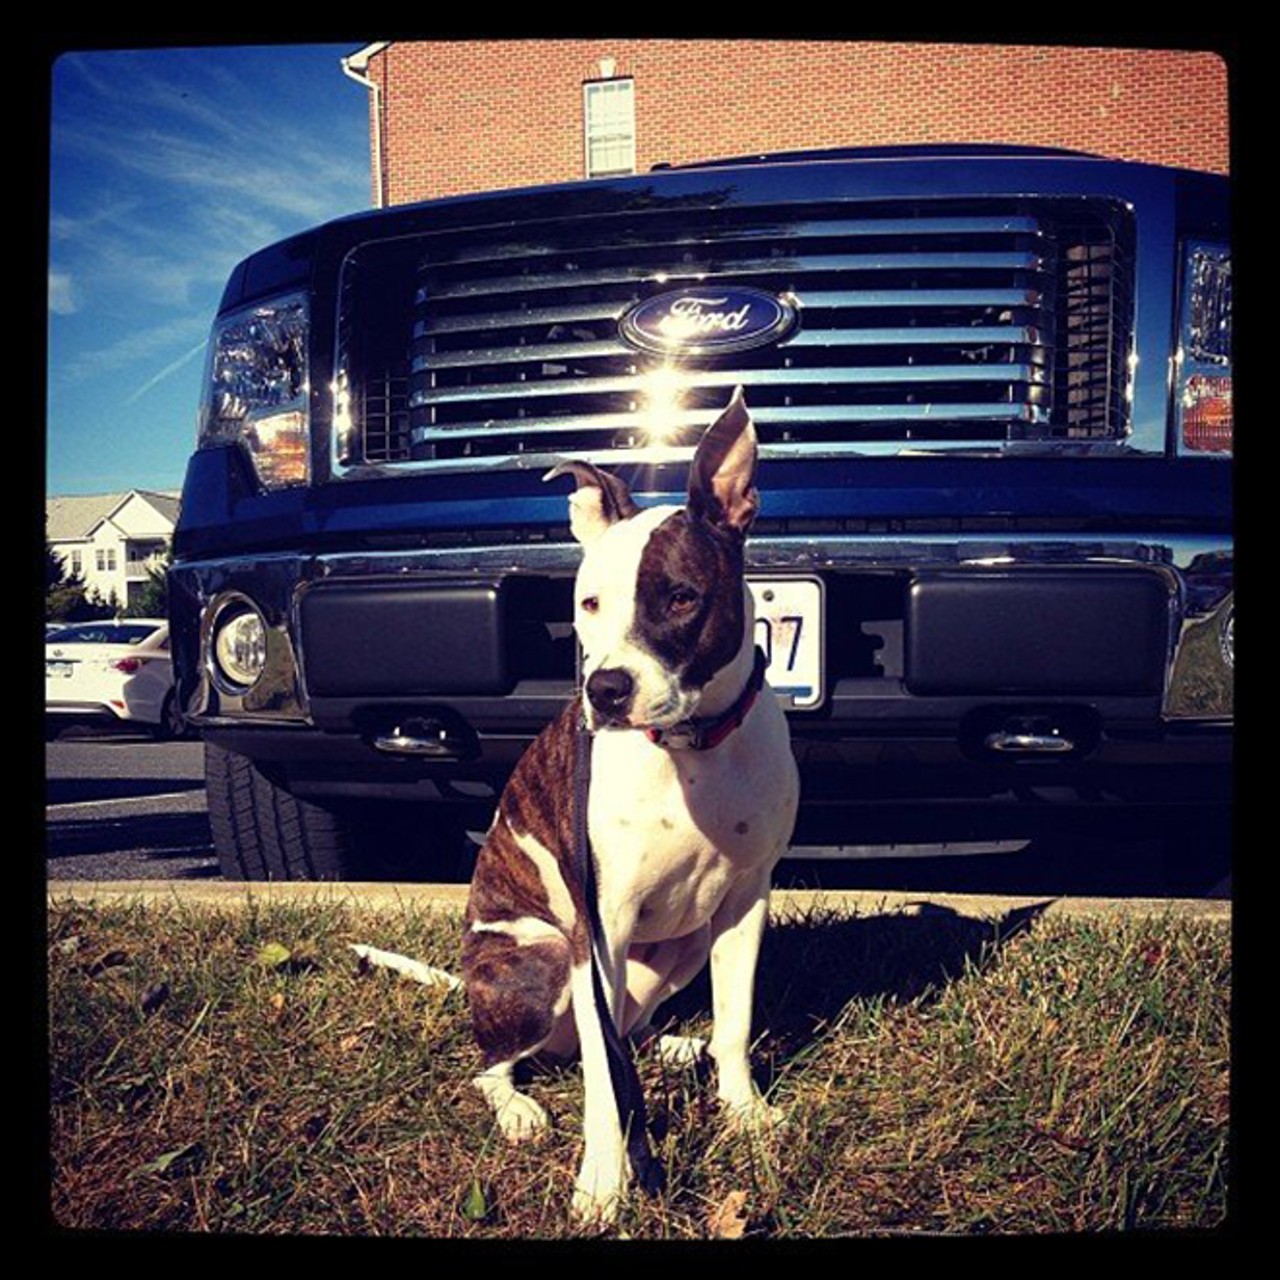 Your own dog could run you over with an F-150.
Photo via Instagram user xoxoroxydog